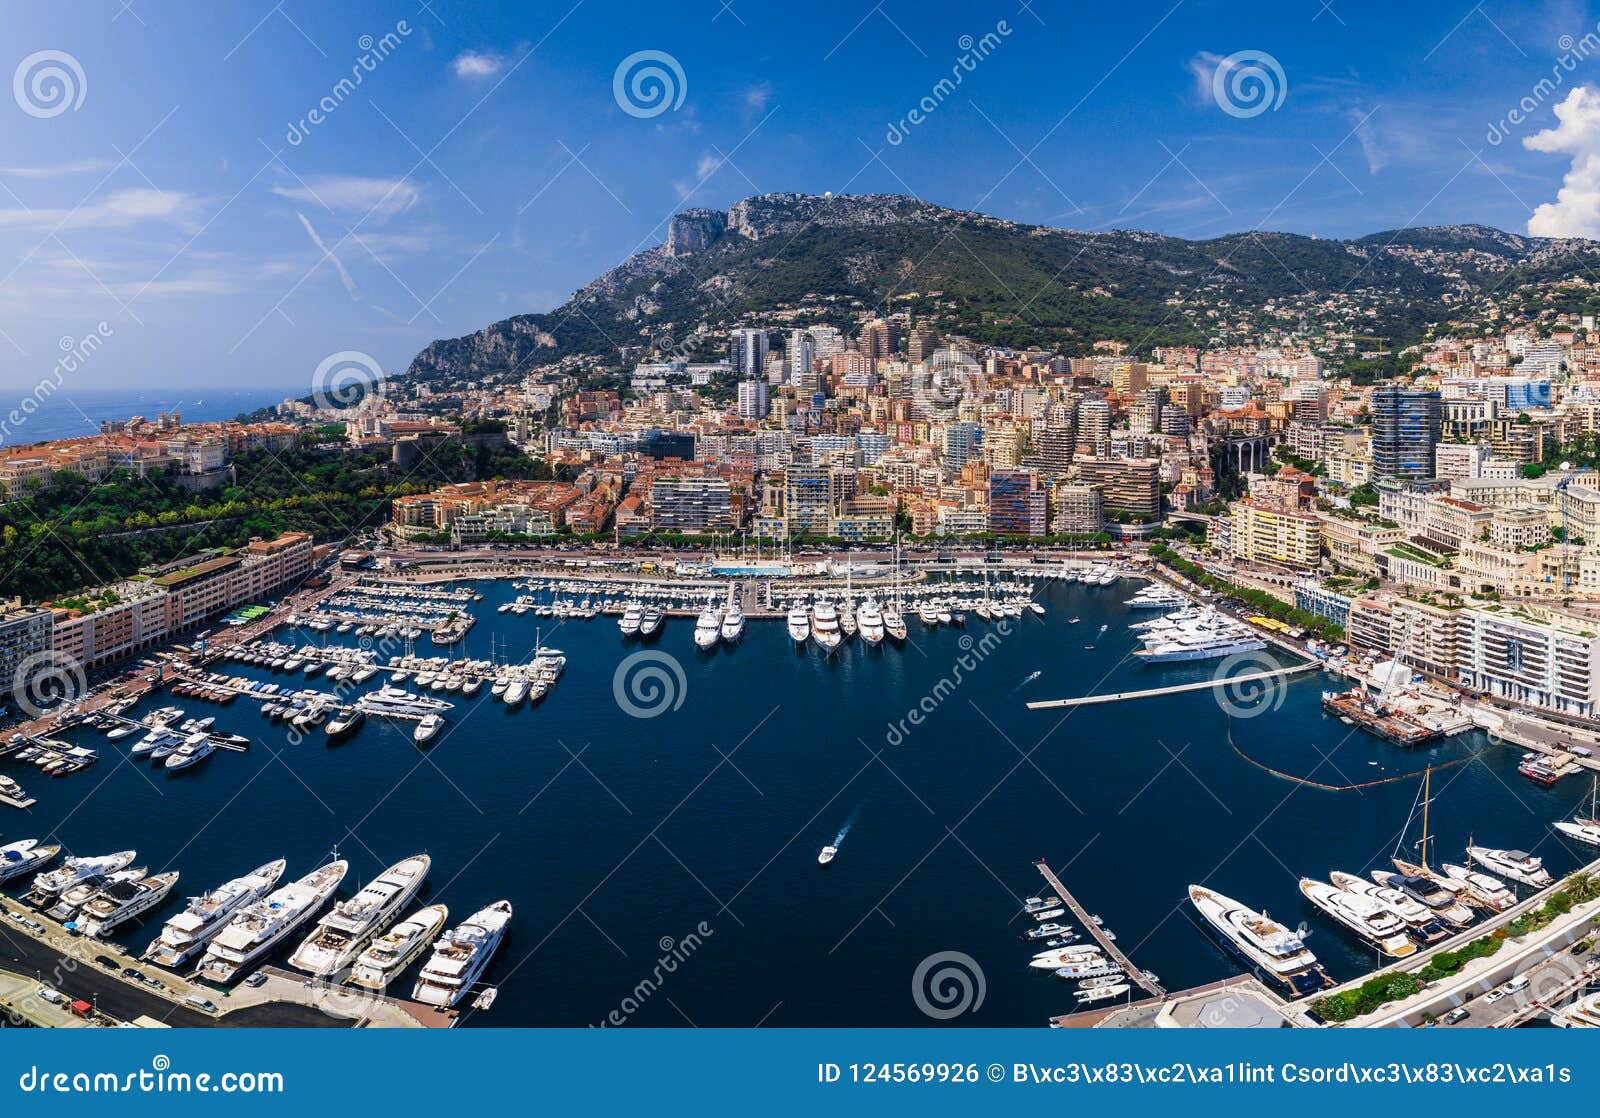 areal view of the port in the rich city monte-carlo in monaco.